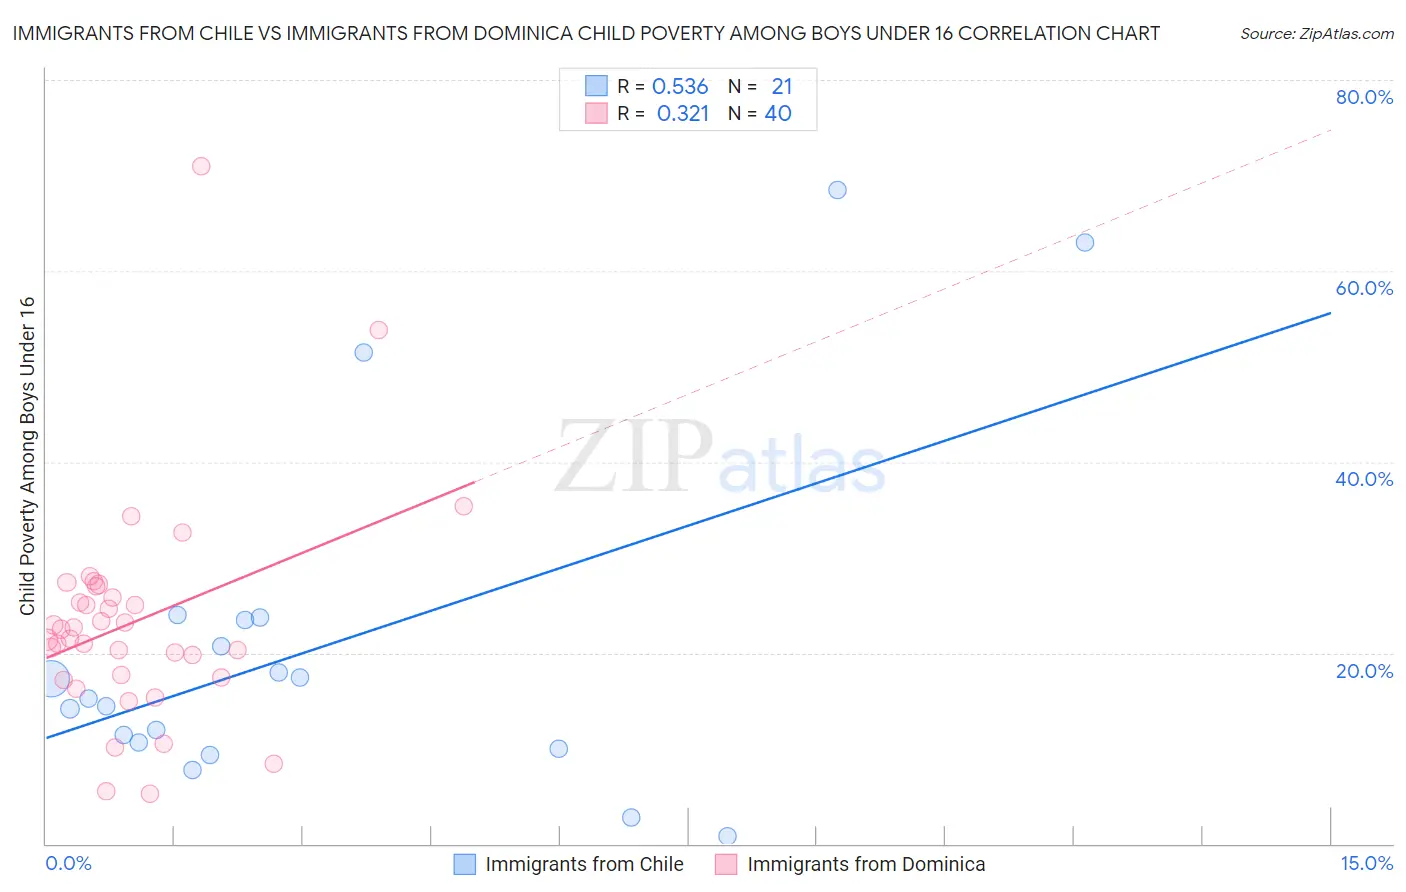 Immigrants from Chile vs Immigrants from Dominica Child Poverty Among Boys Under 16